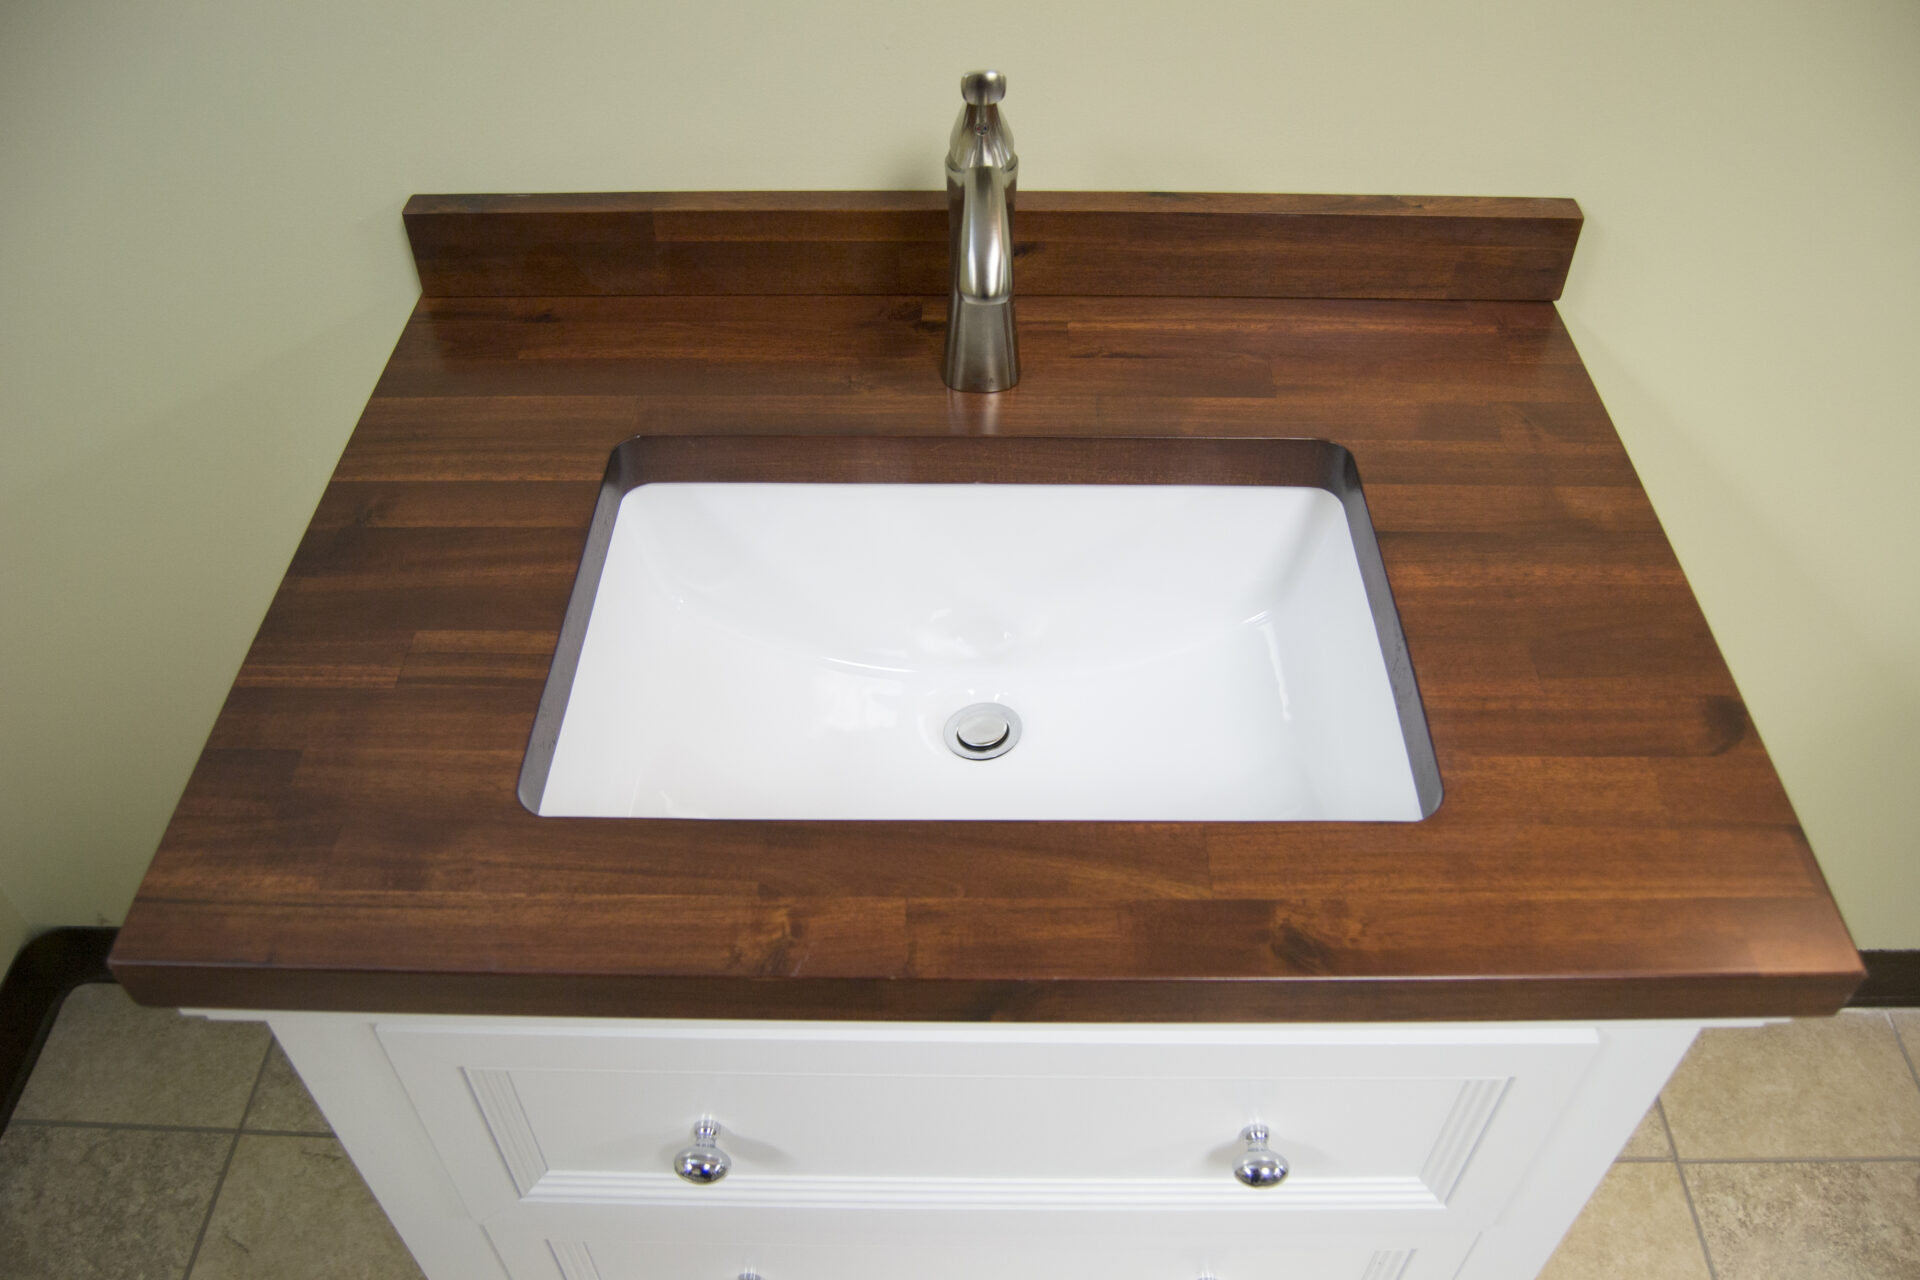 Madera Cherry Vanity Top with white undermount sink and cabinet. Bathrooms by AMI.